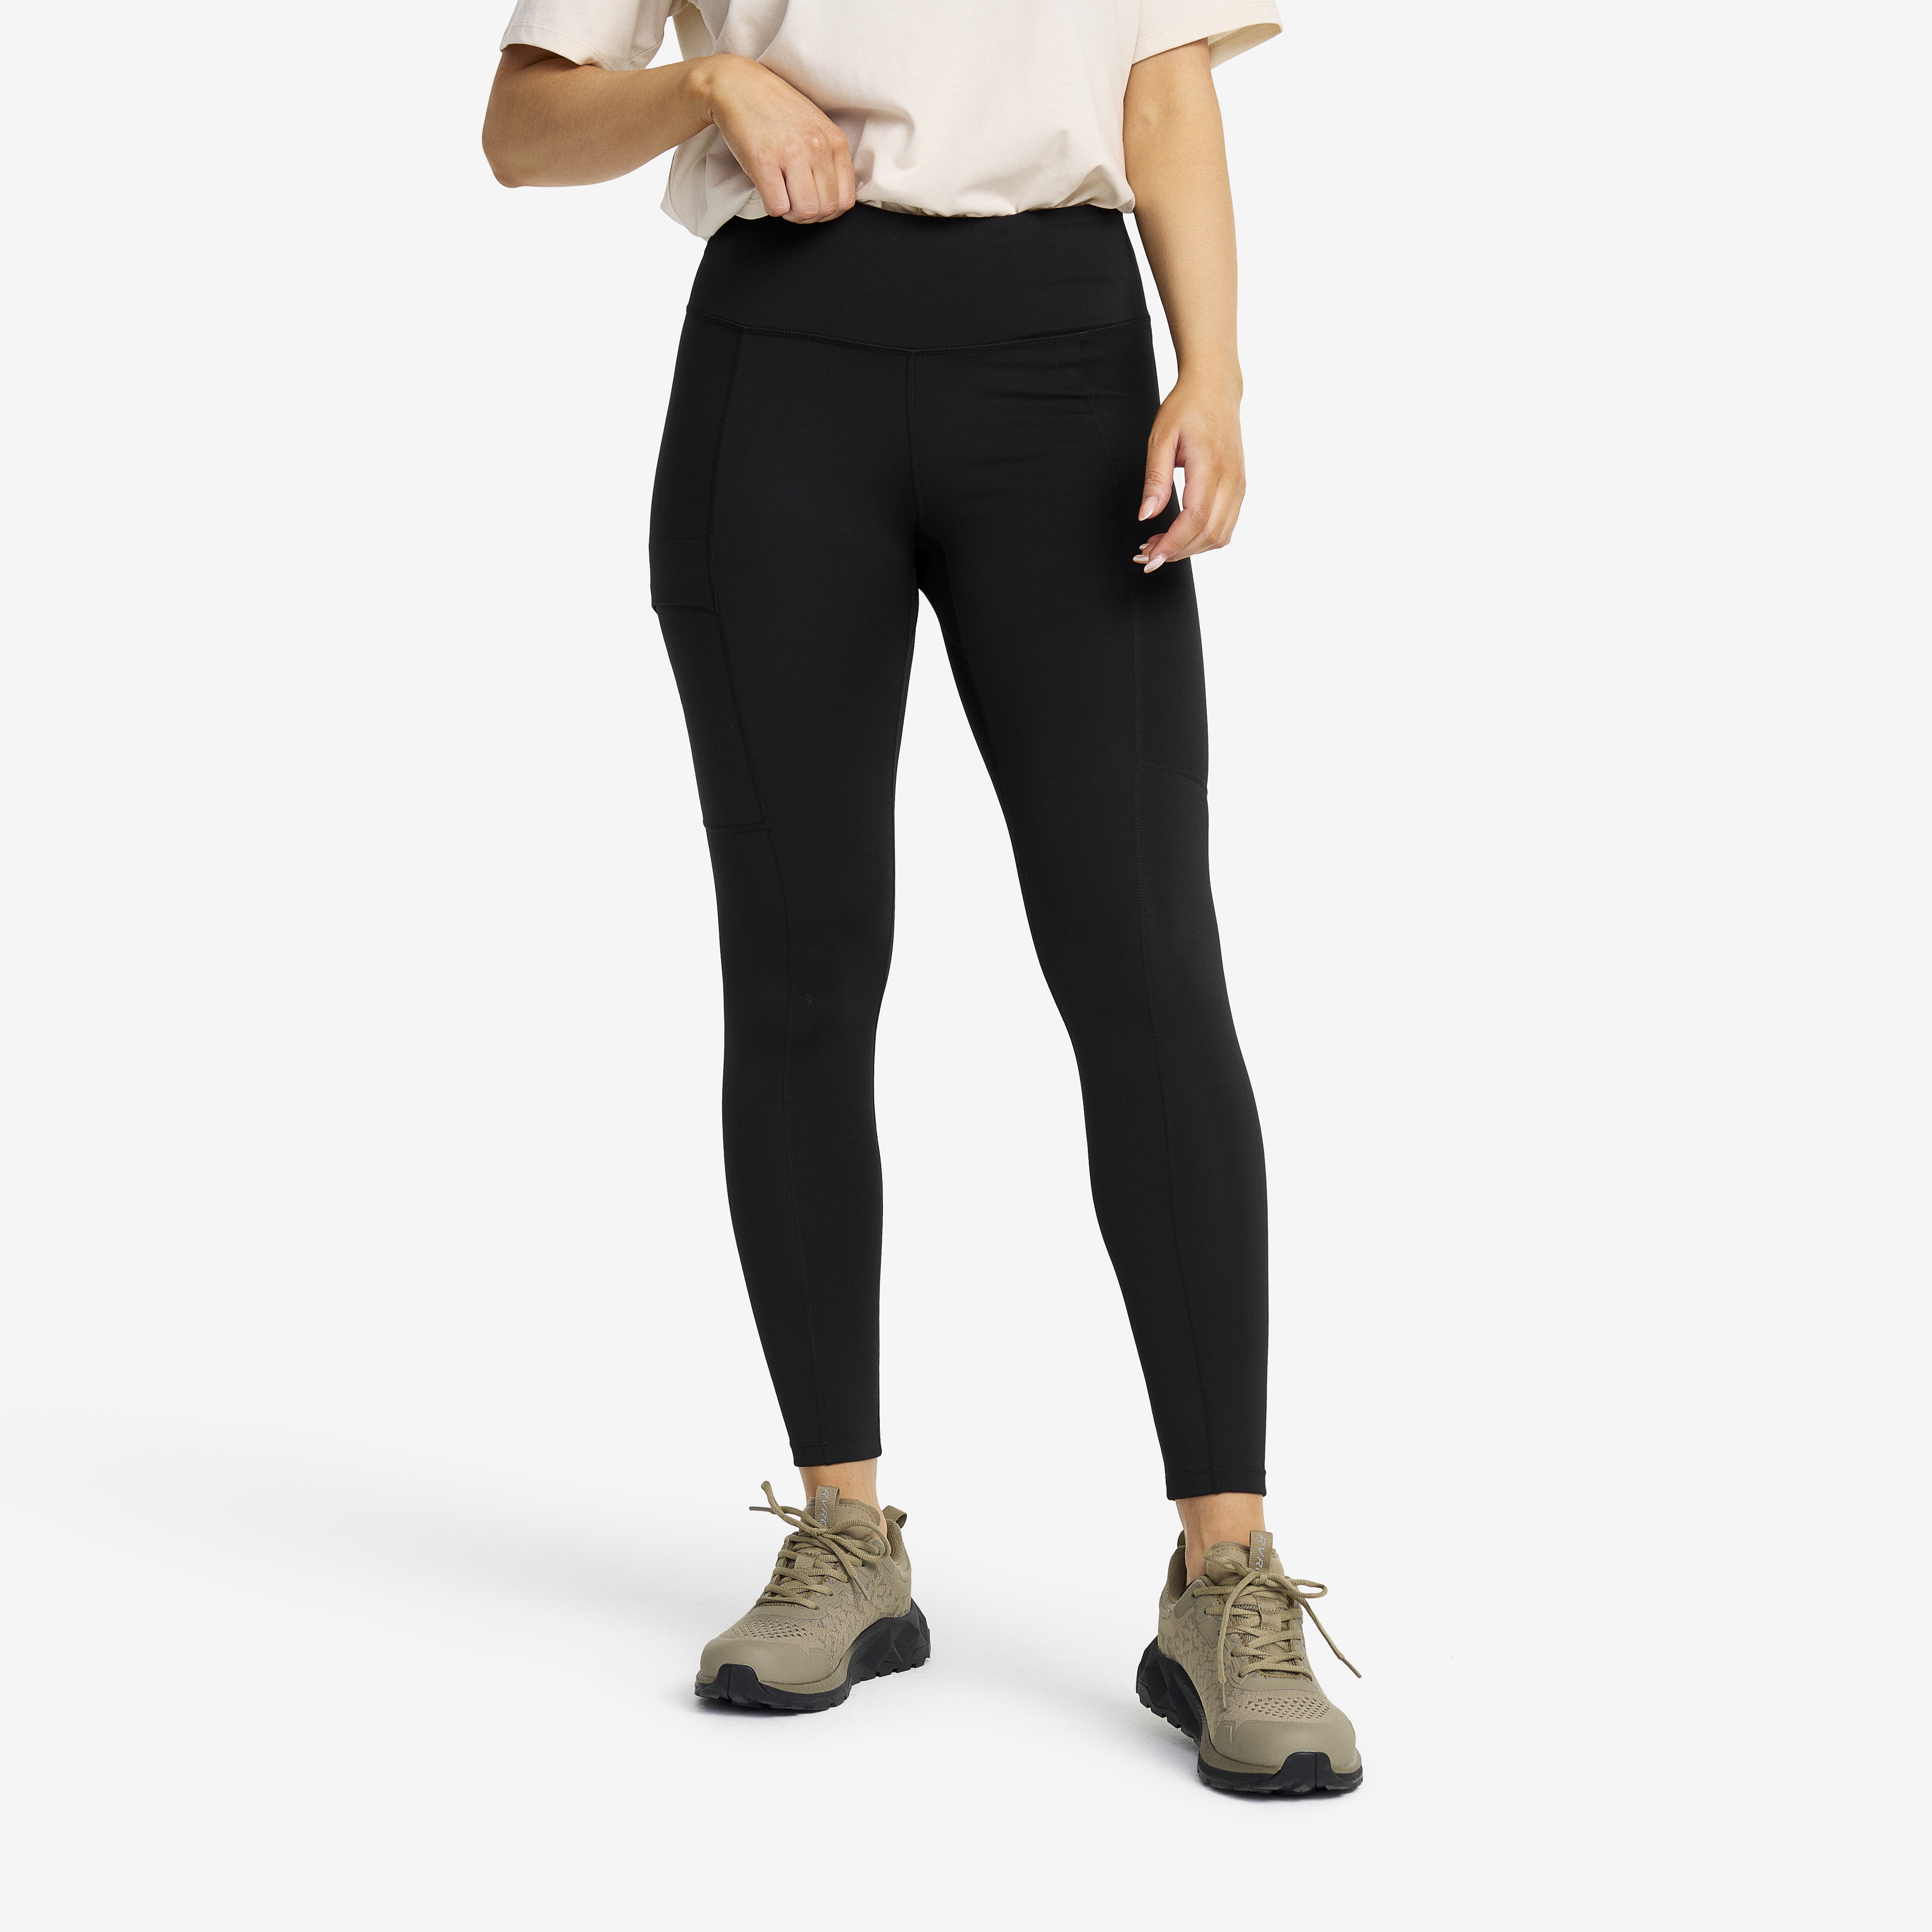 CLEARANCE: WOMEN'S BLUE HIGH WAIST, REG LENGTH PROTECTIVE LEGGINGS - MADE  OF 100% DUPONT™ KEVLAR® FIBERS (Limited Sizes FINAL SALE)